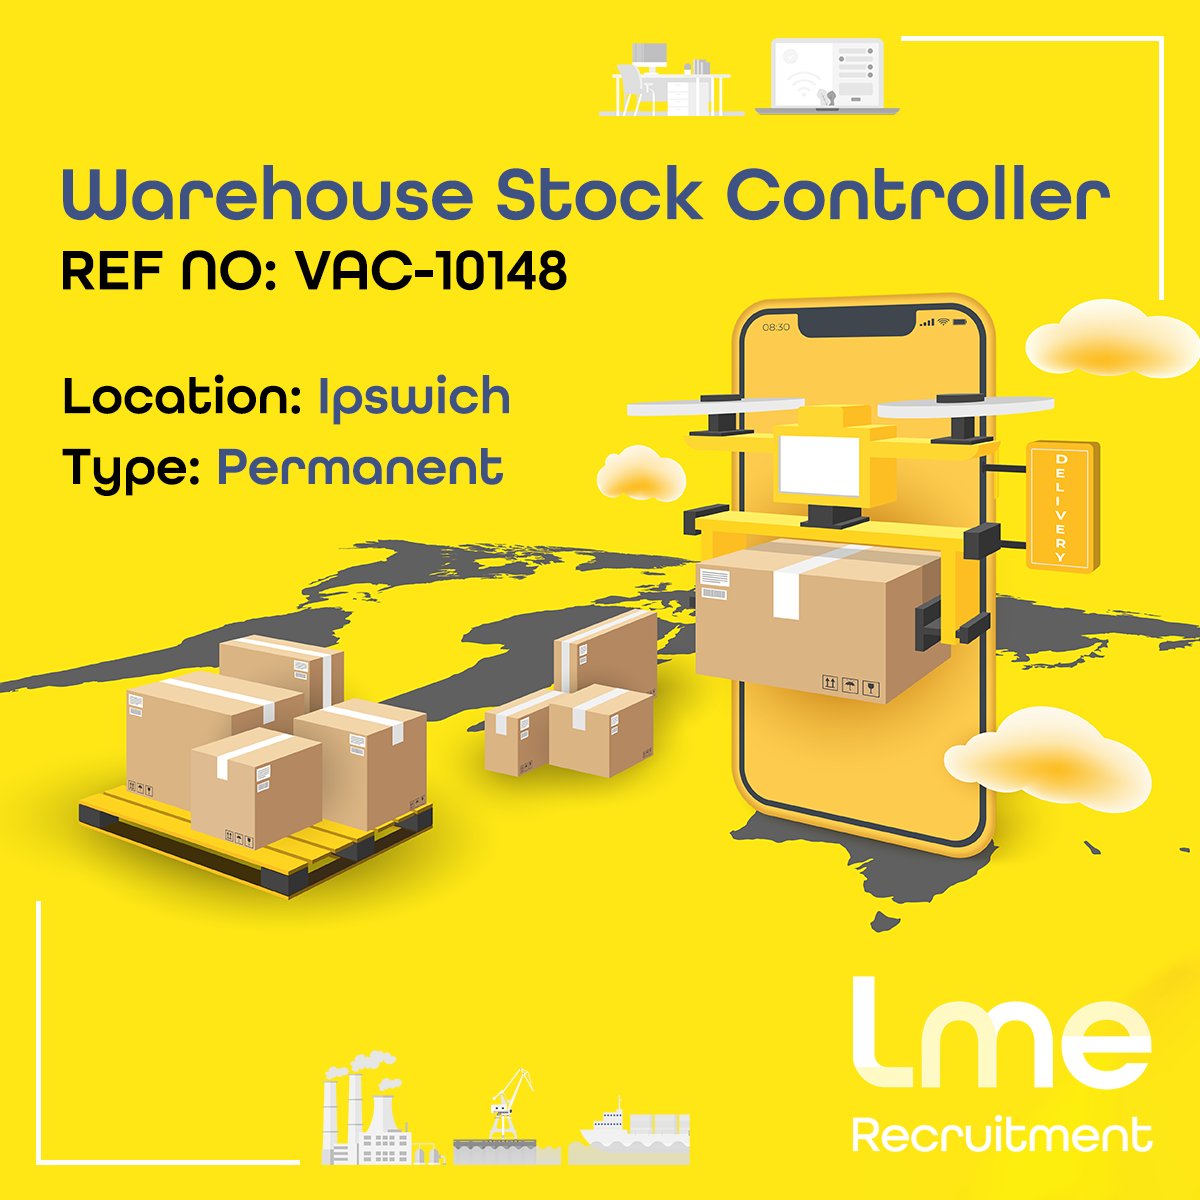 Attention job seekers! 

Our client is currently hiring a Warehouse Stock Controller to join their team in Ipswich.

If you're a detail-oriented individual with a passion for inventory management, we want to hear from you. 

lmerecruitment.co.uk/jobs/job-detai…

#IpswichJobs #lmerecruitment